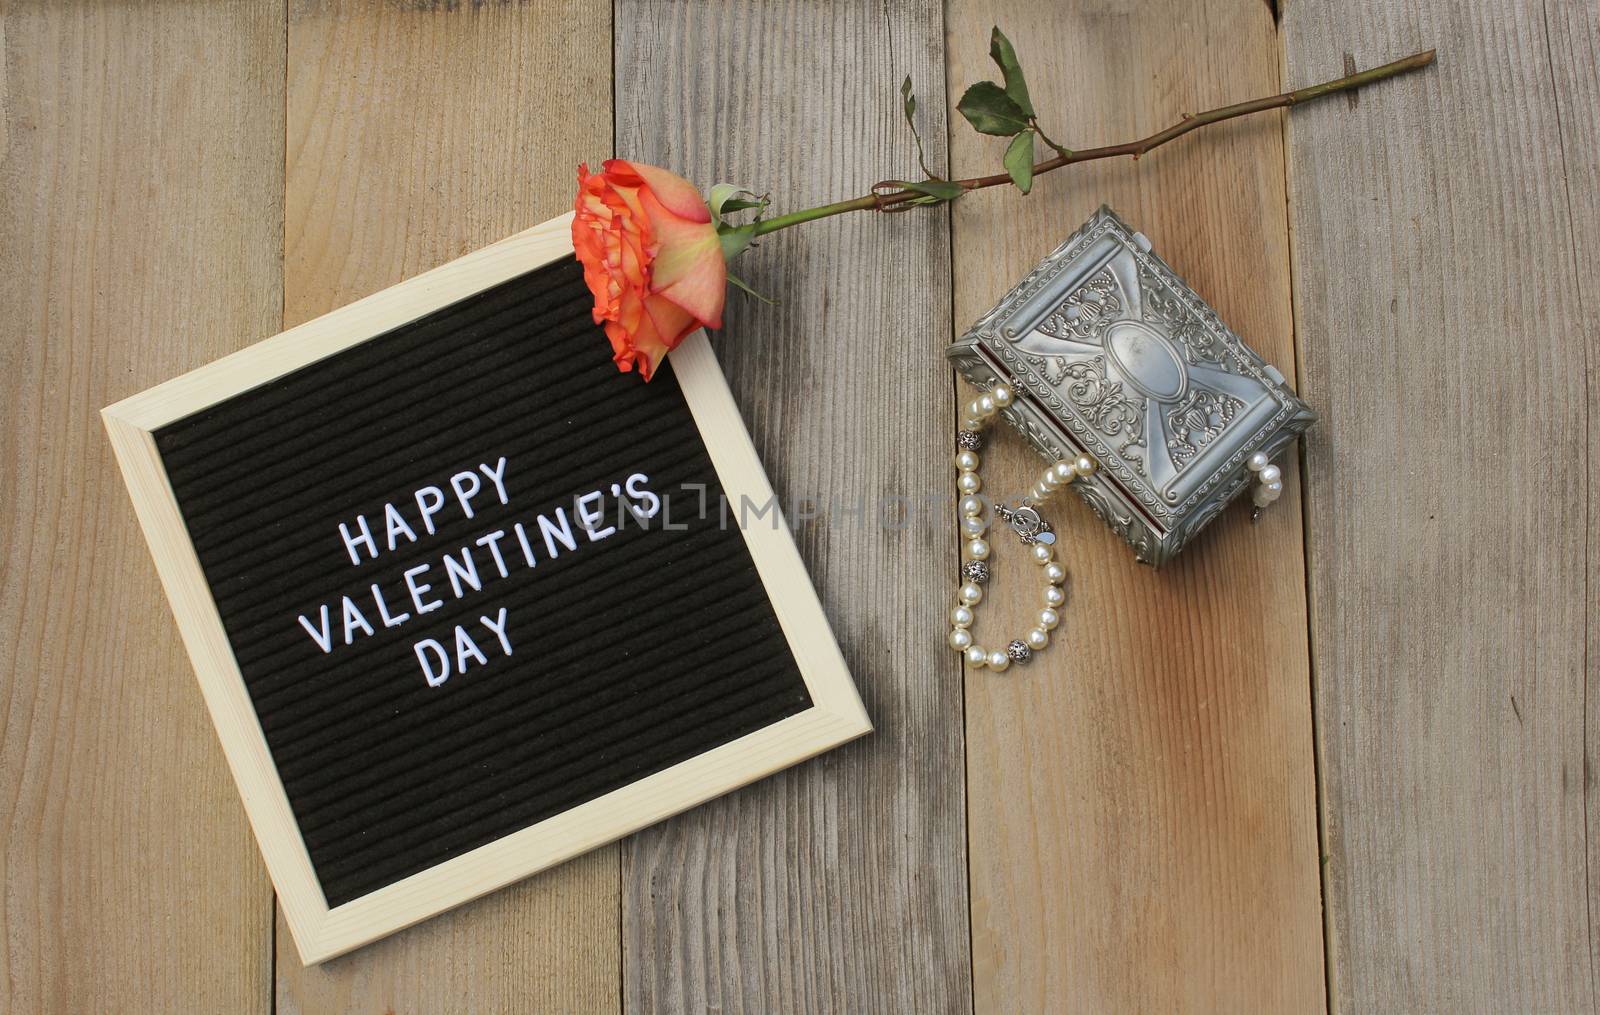 Happy Valentines Day Sign With Pearls in Jewelry Box